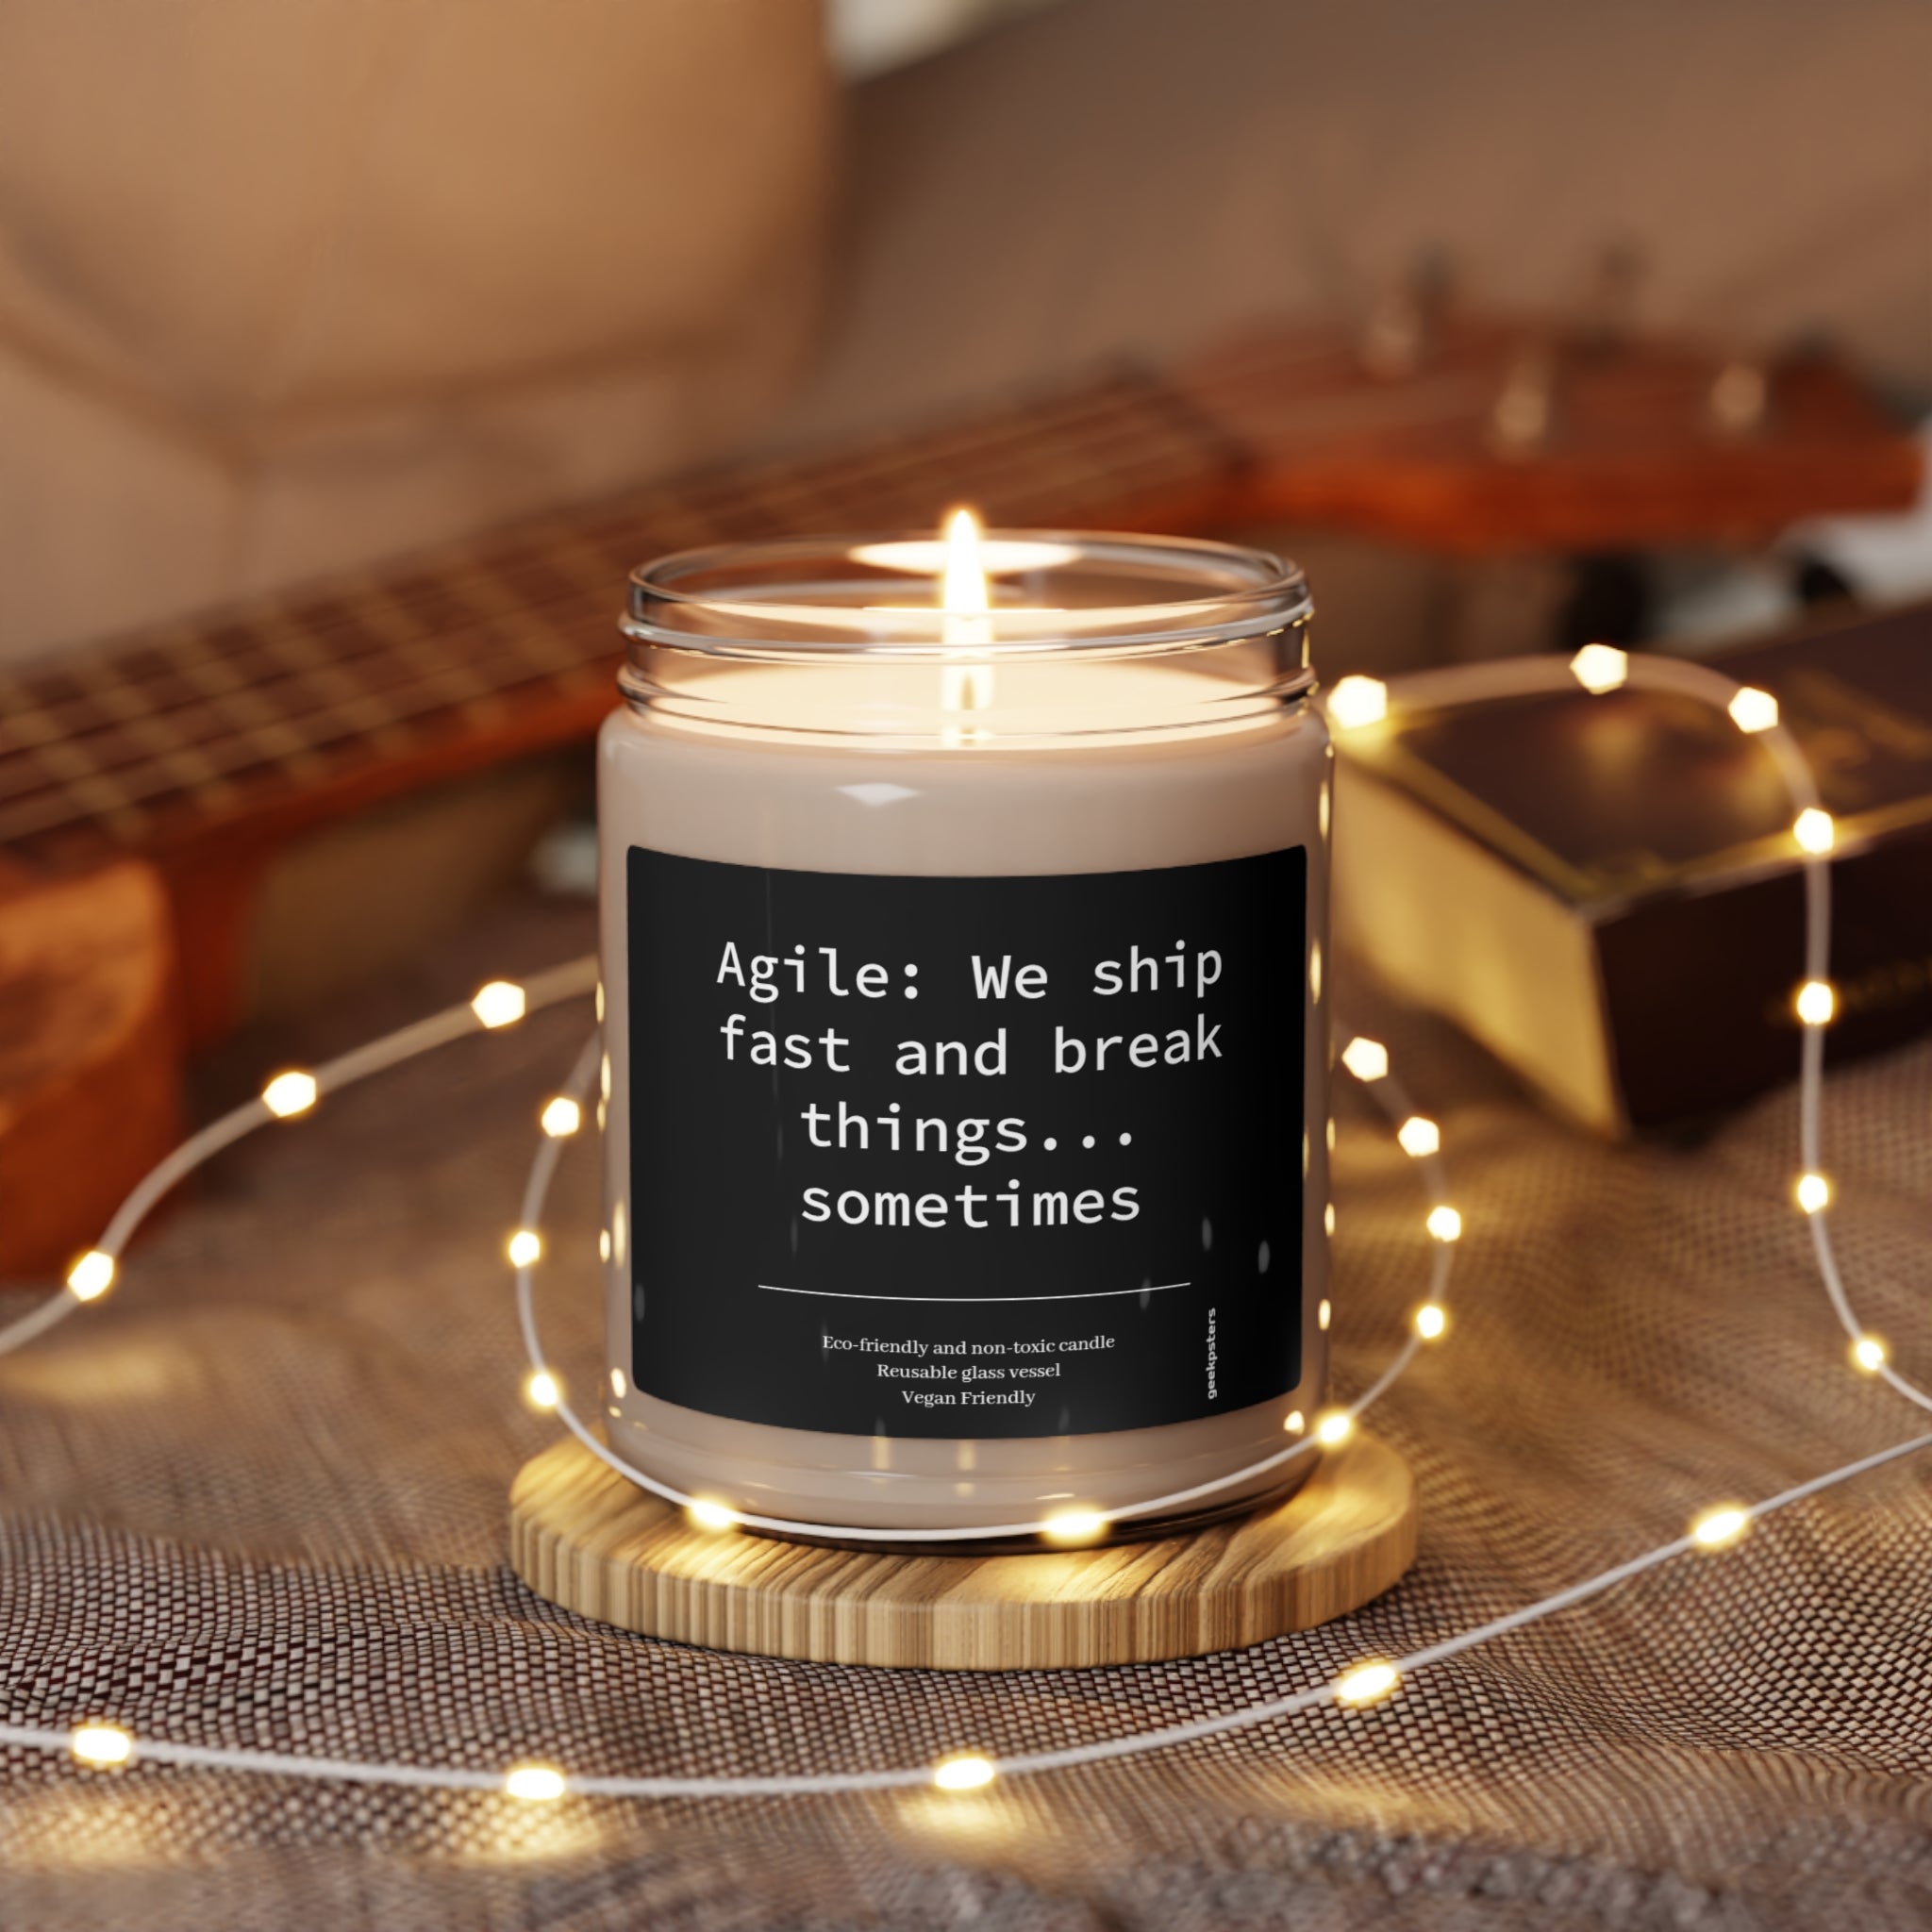 A lit Agile: We Ship Fast and Brake Things scented candle in a glass jar, surrounded by a warm ambiance and string lights.